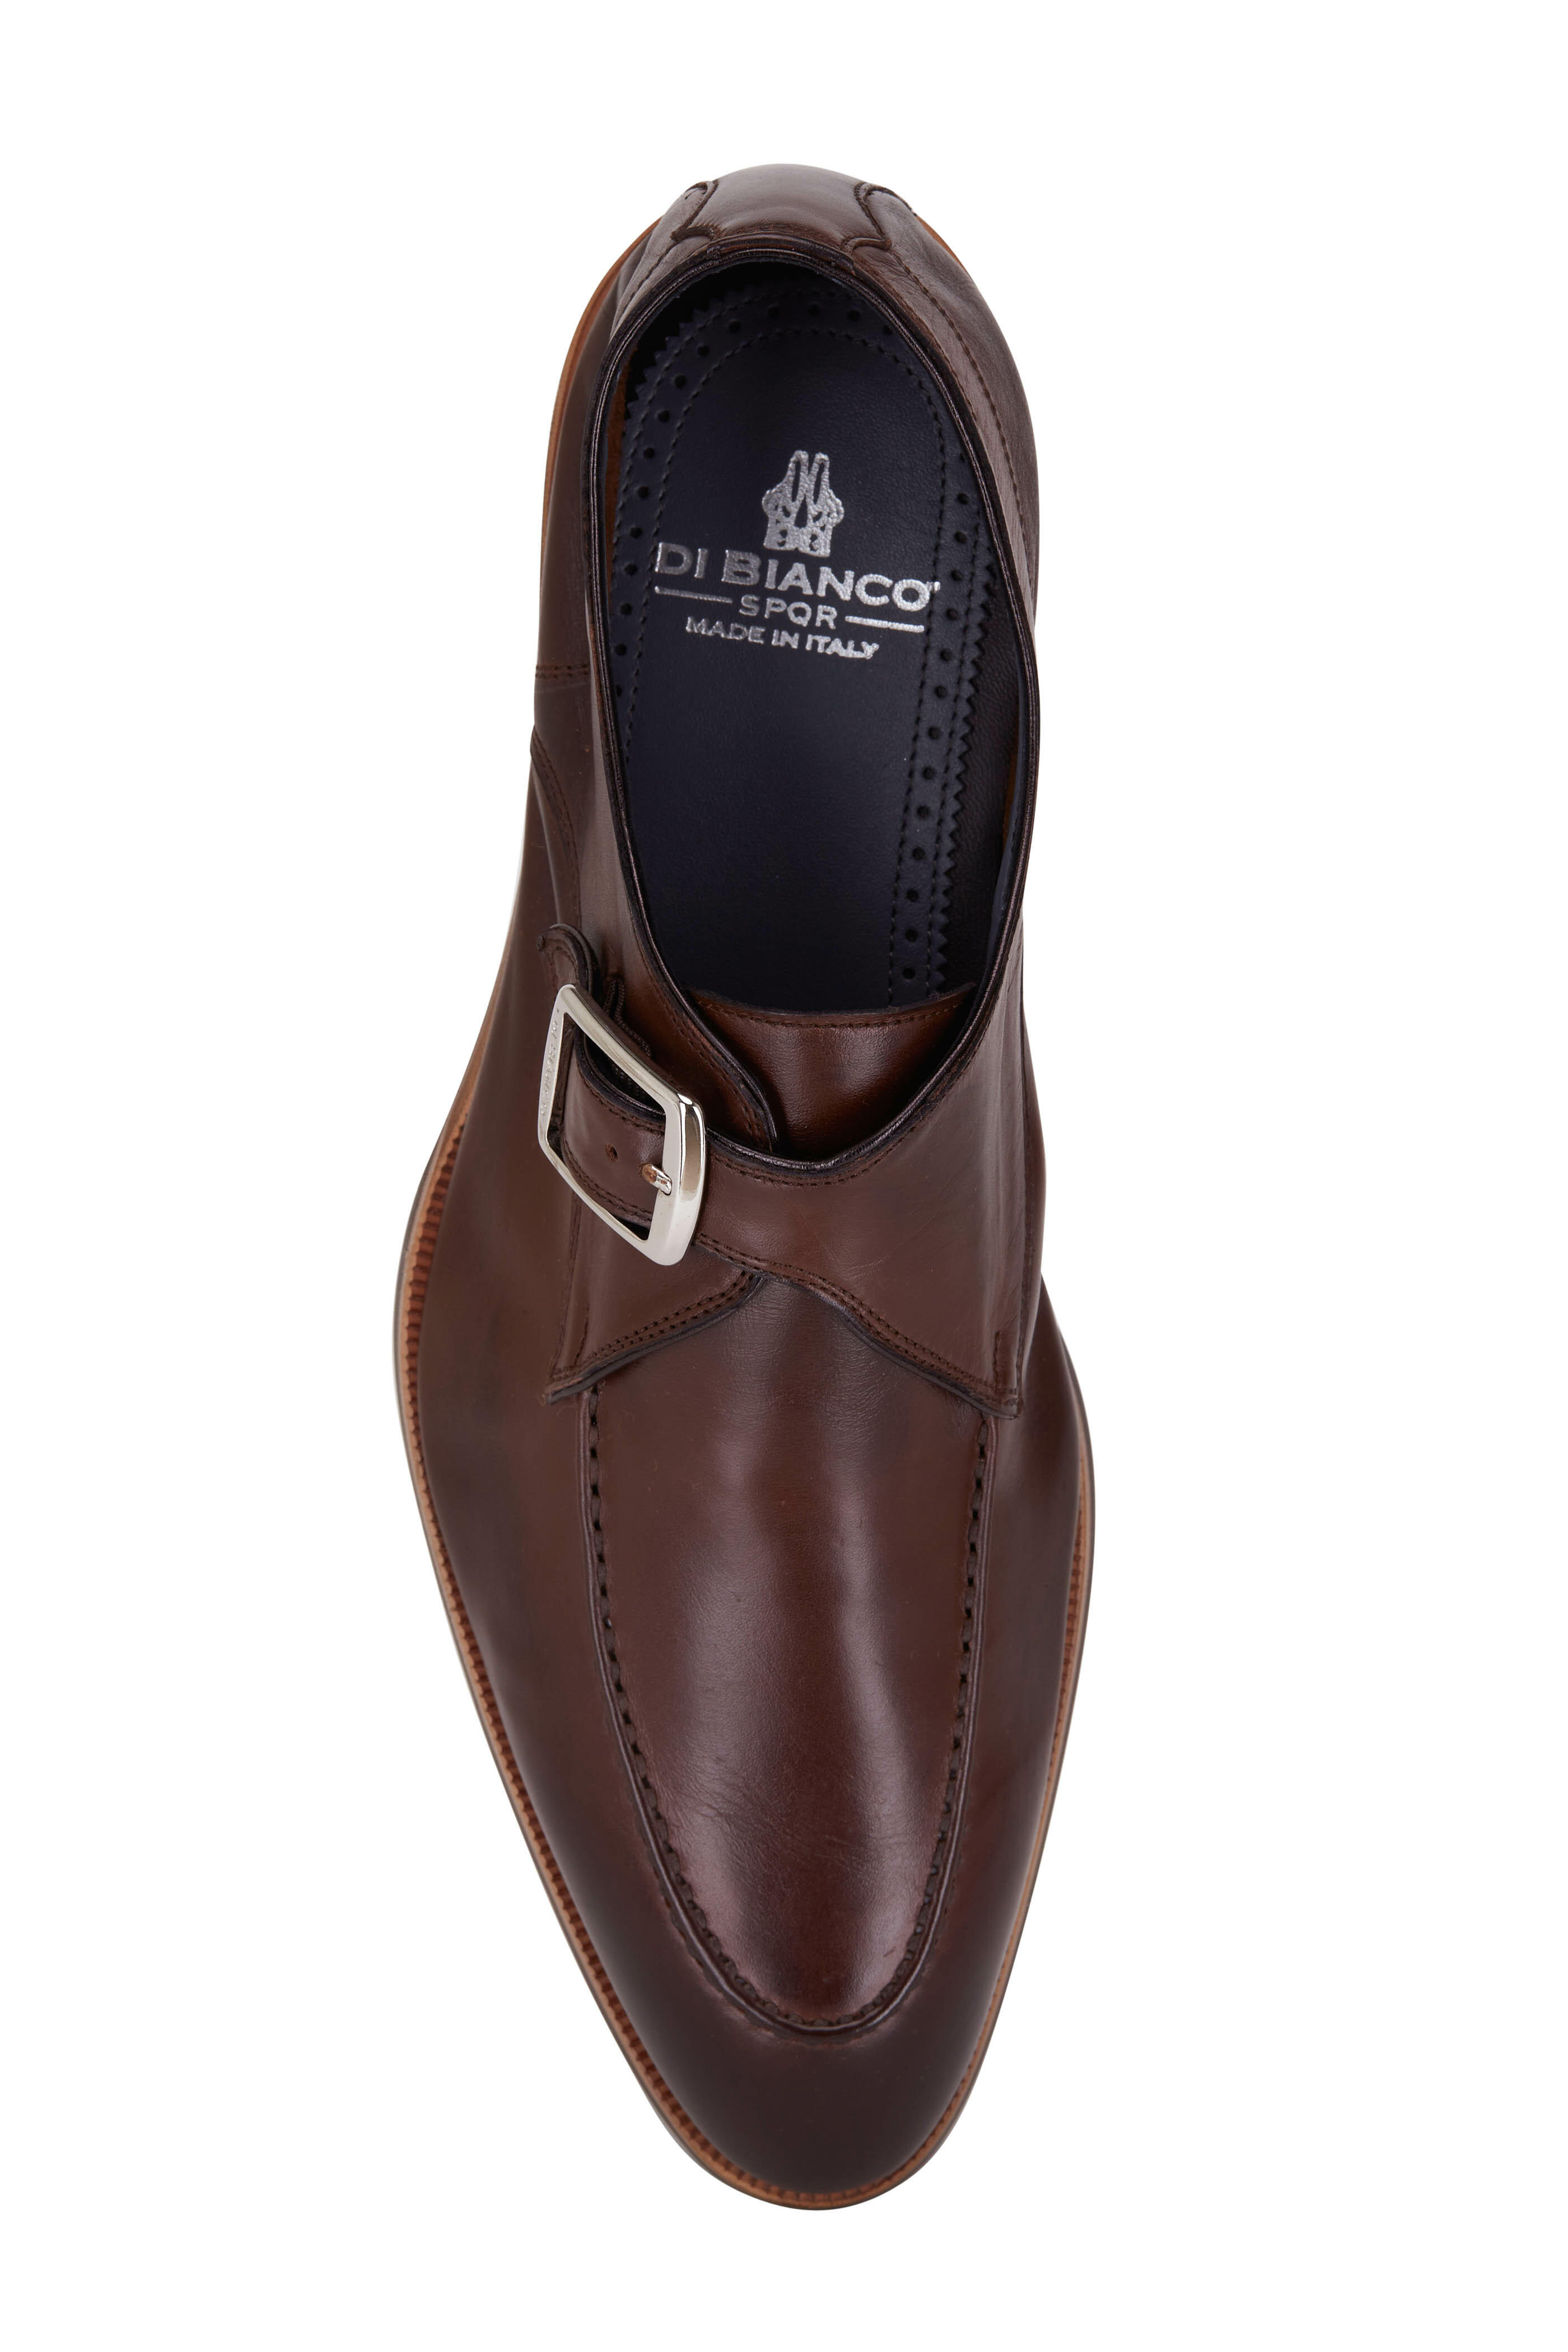 Di Bianco - Parma Brown Leather Strap | Mitchell Stores